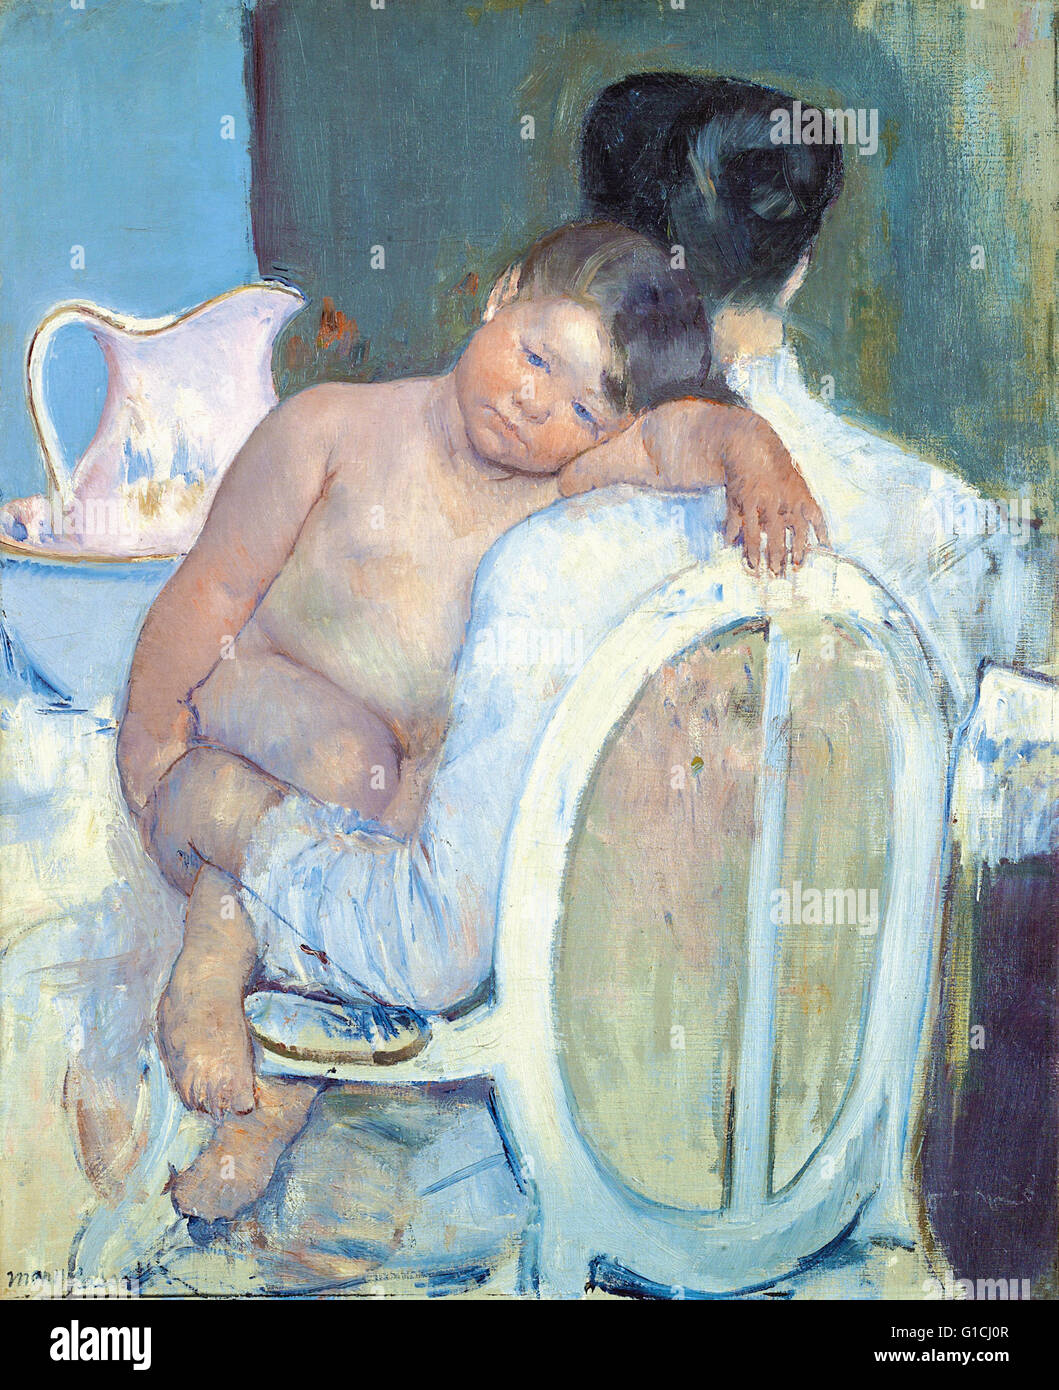 Mary Cassatt - Woman Sitting with a Child in Her Arms - Museo de Bellas Artes de Bilbao Stock Photo